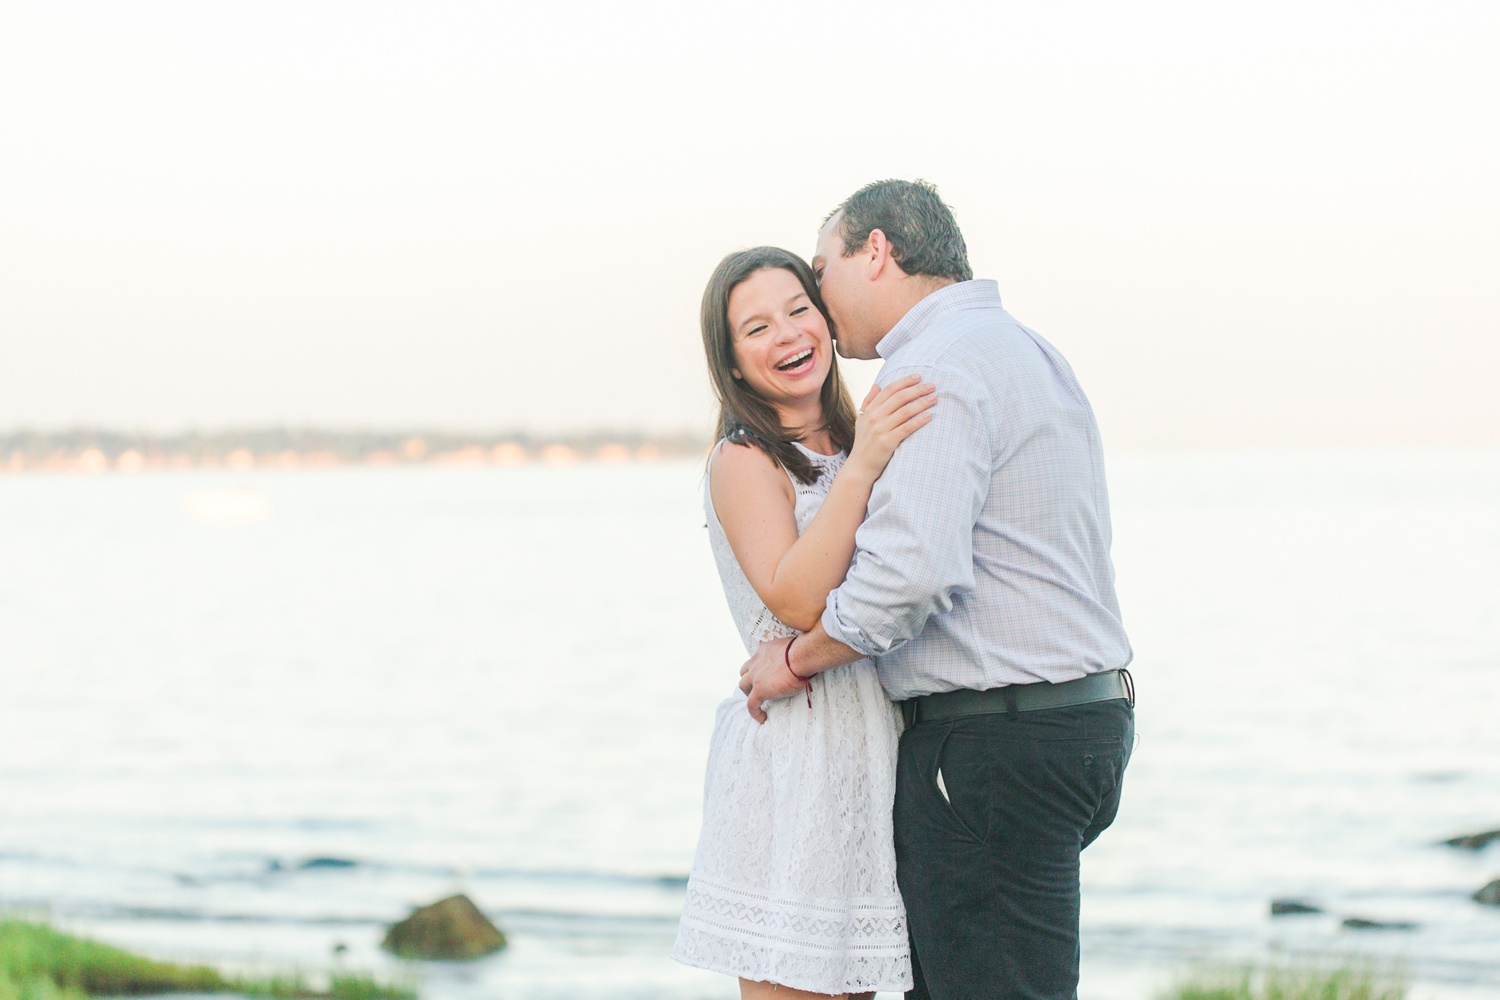 tods-point-engagement-session-greenwich-ct-top-connecticut-new-york-destination-wedding-photographer-shaina-lee-photography-photo